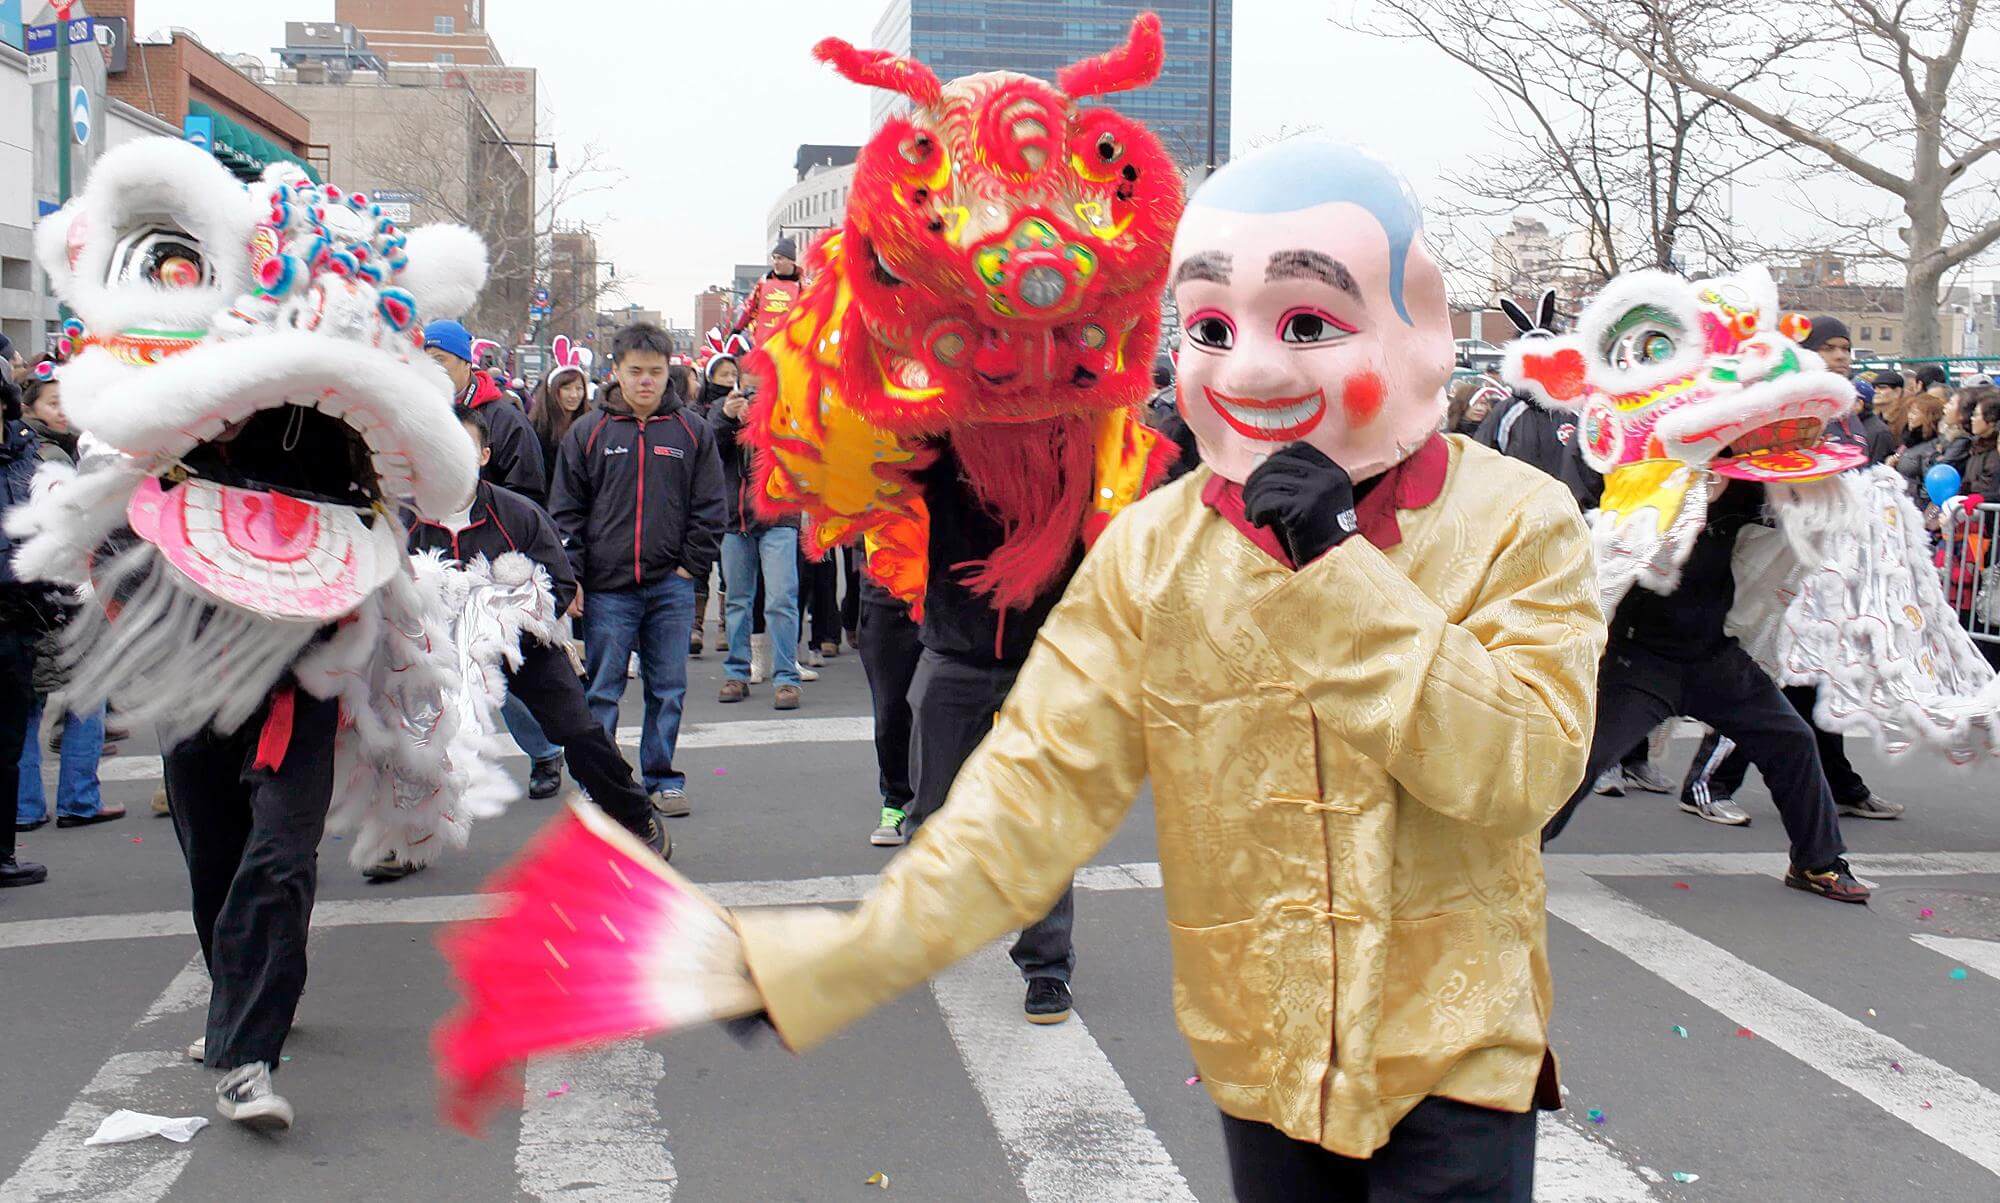 Flushing Lunar New Year parade celebrates Qns. diversity Annual event